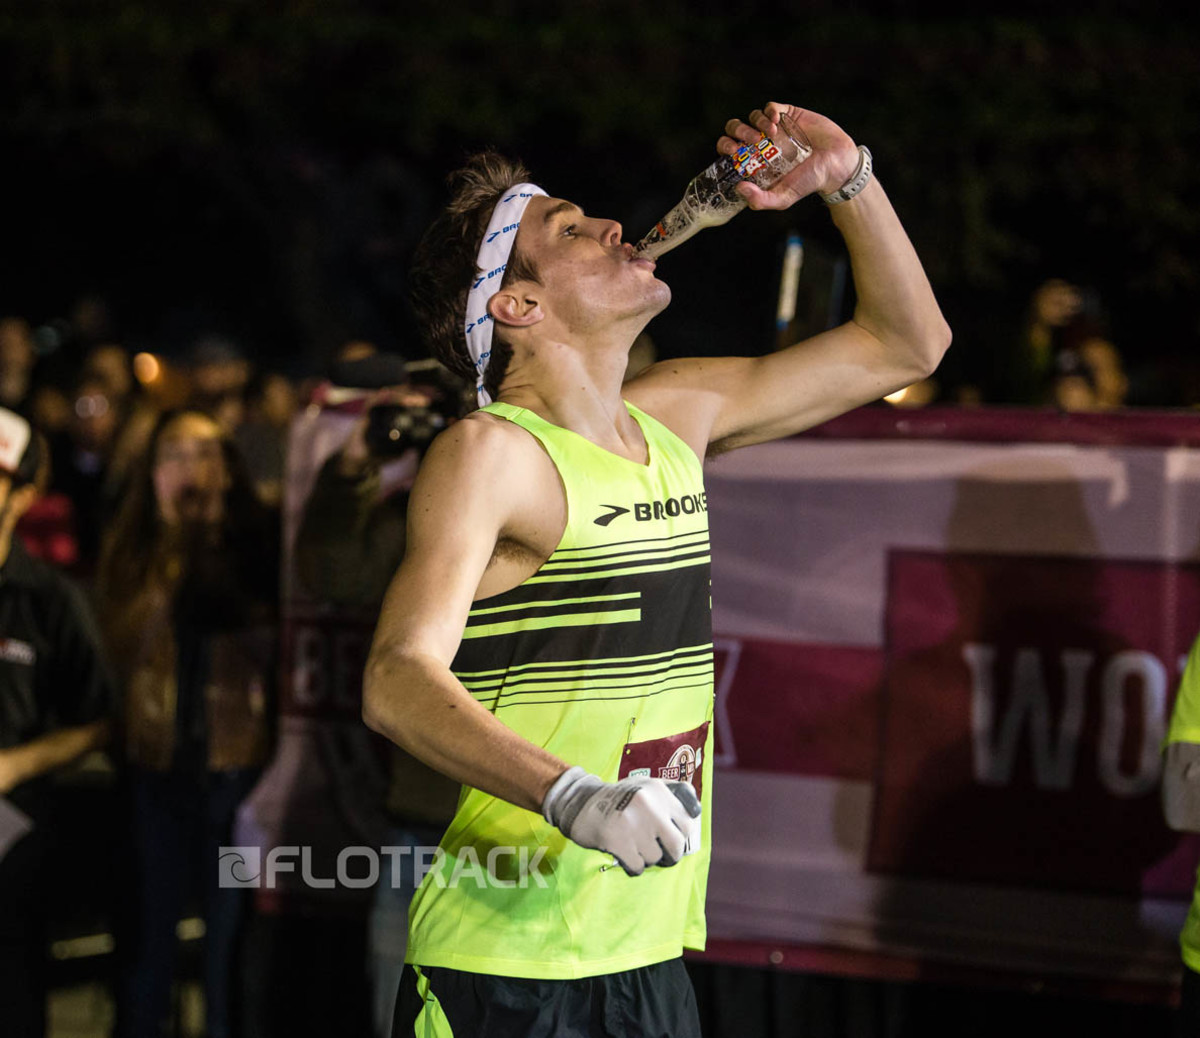 Lewis Kent chugs a beer during the FloTrack Beer Mile on Dec. 1, 2015, in Austin, Tx. Photo via FloTrack / Caleb Kerr Photography